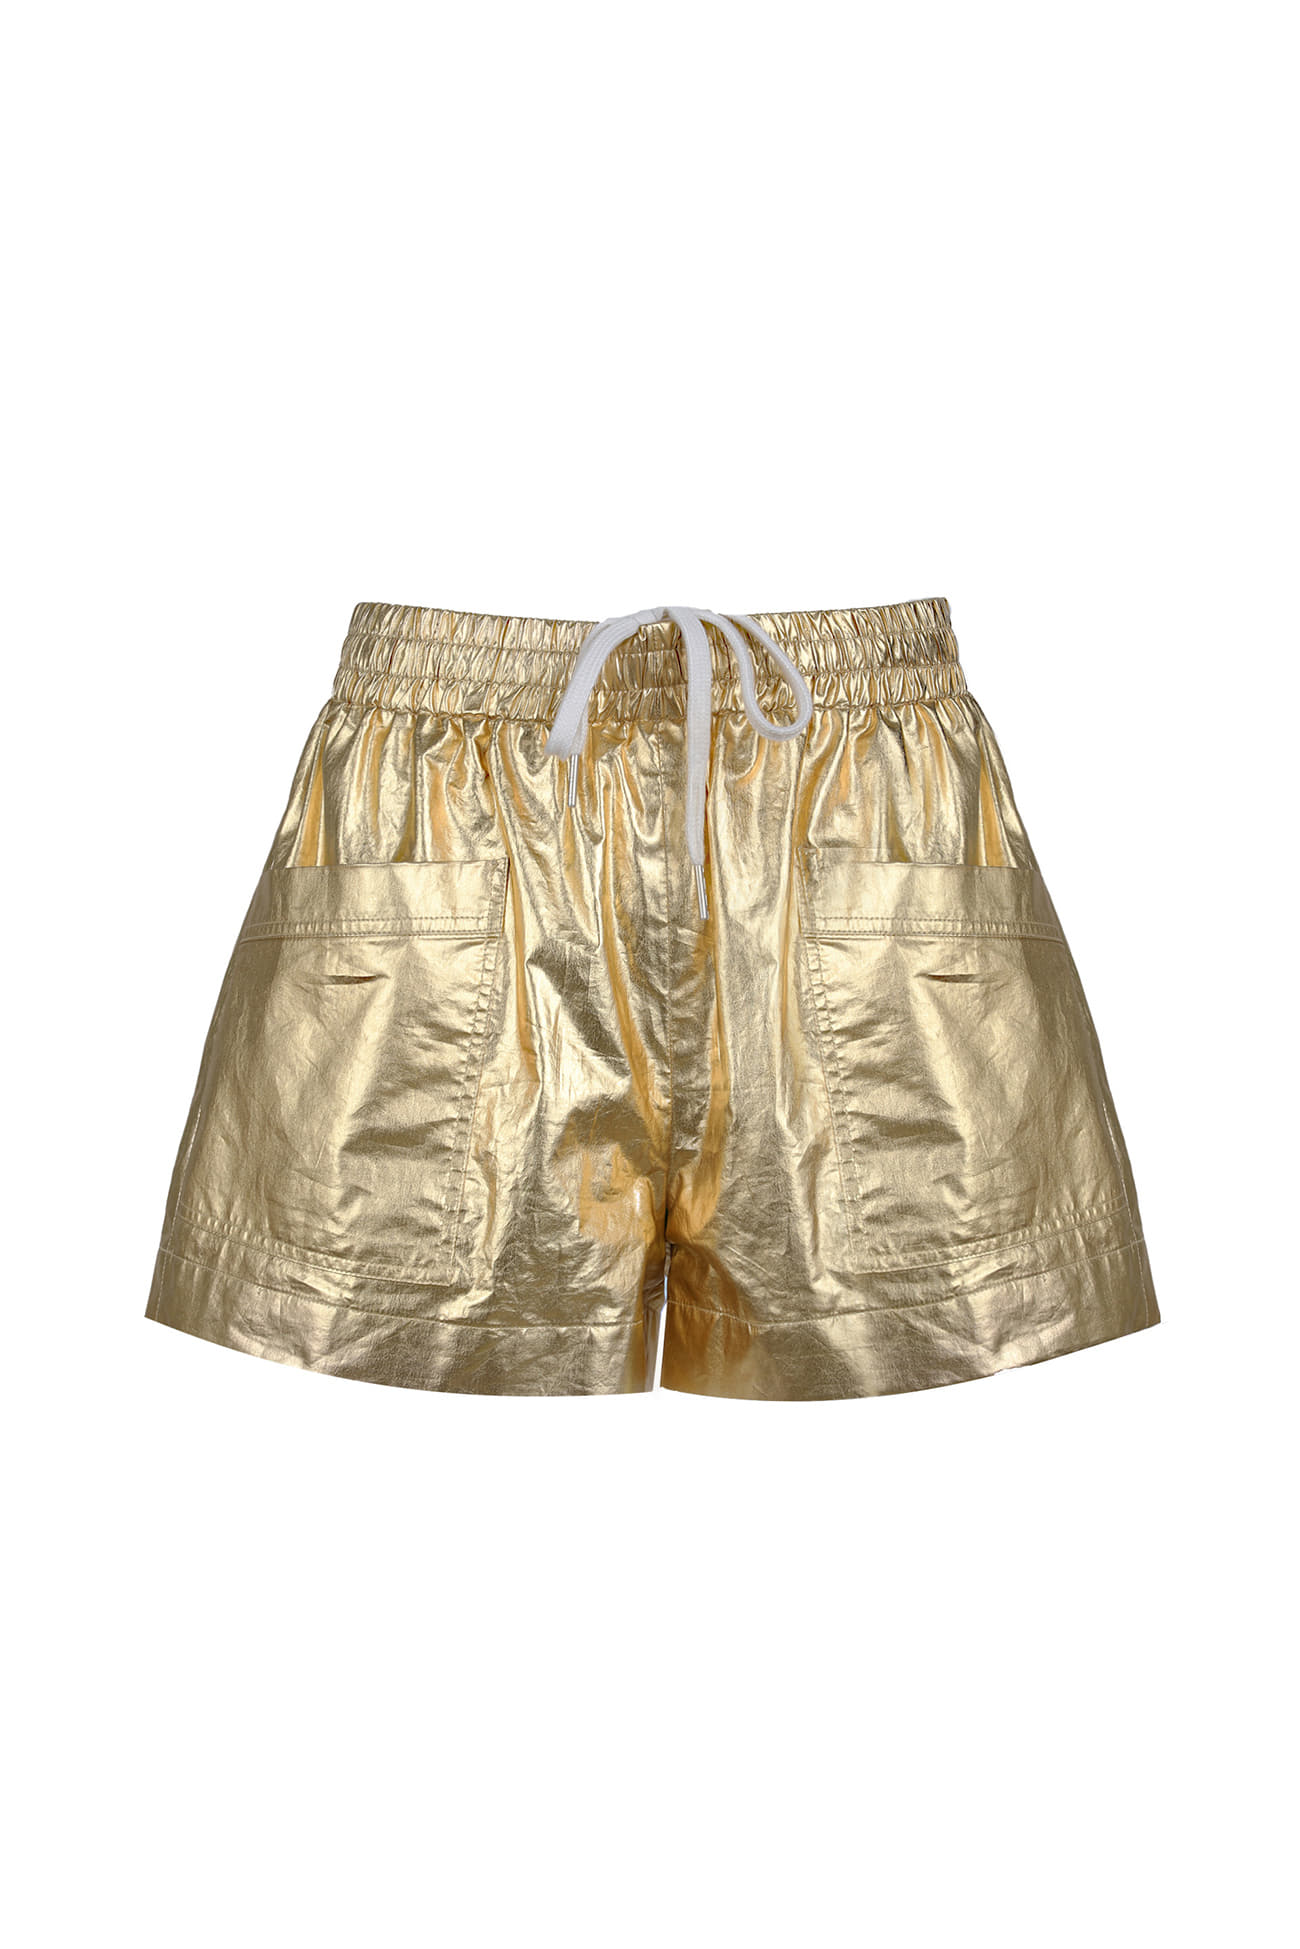 HIGH QUALITY LINE - Crinkled Cotton Shorts